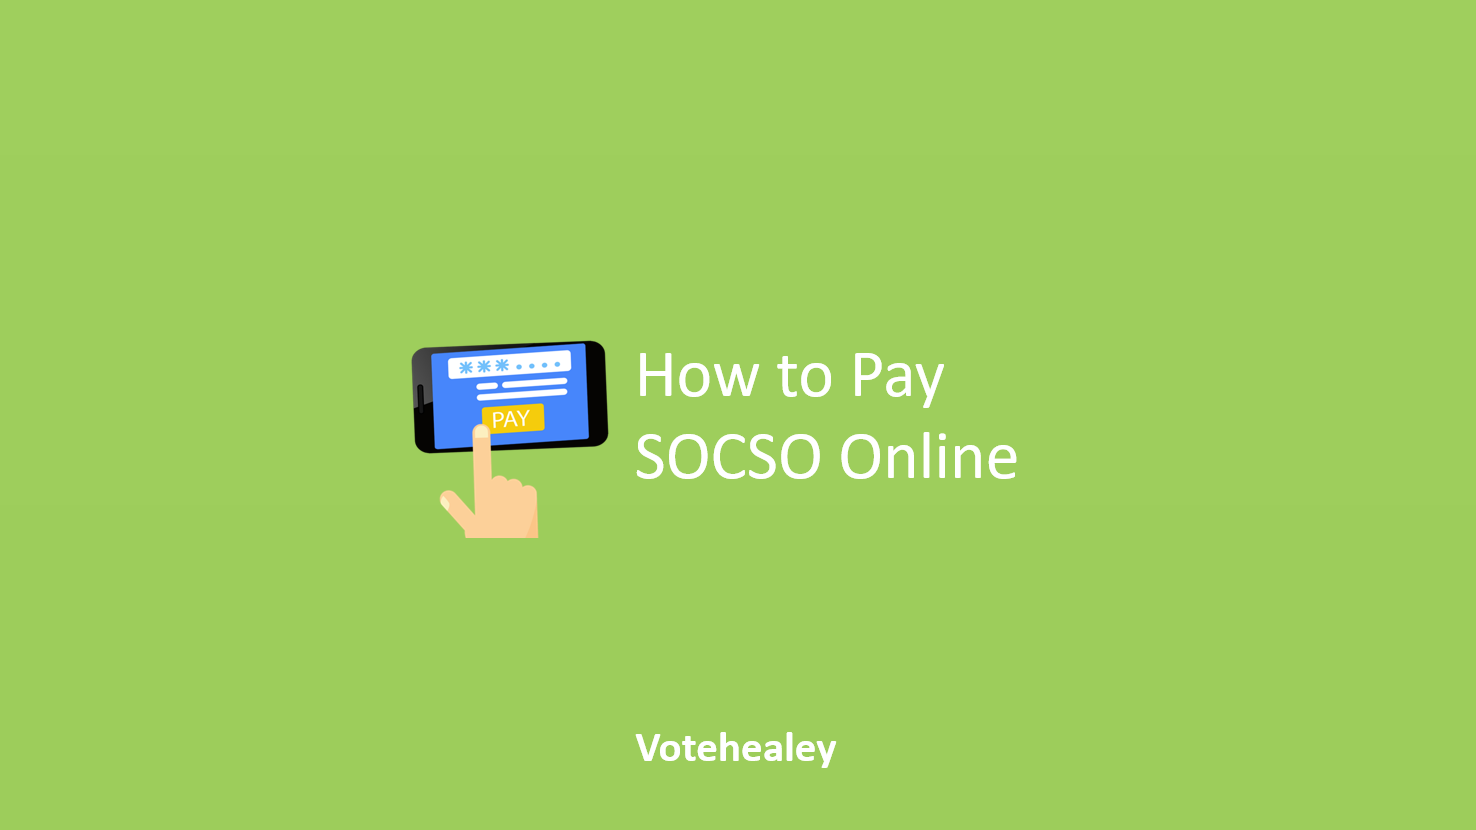 How to Pay SOCSO Online